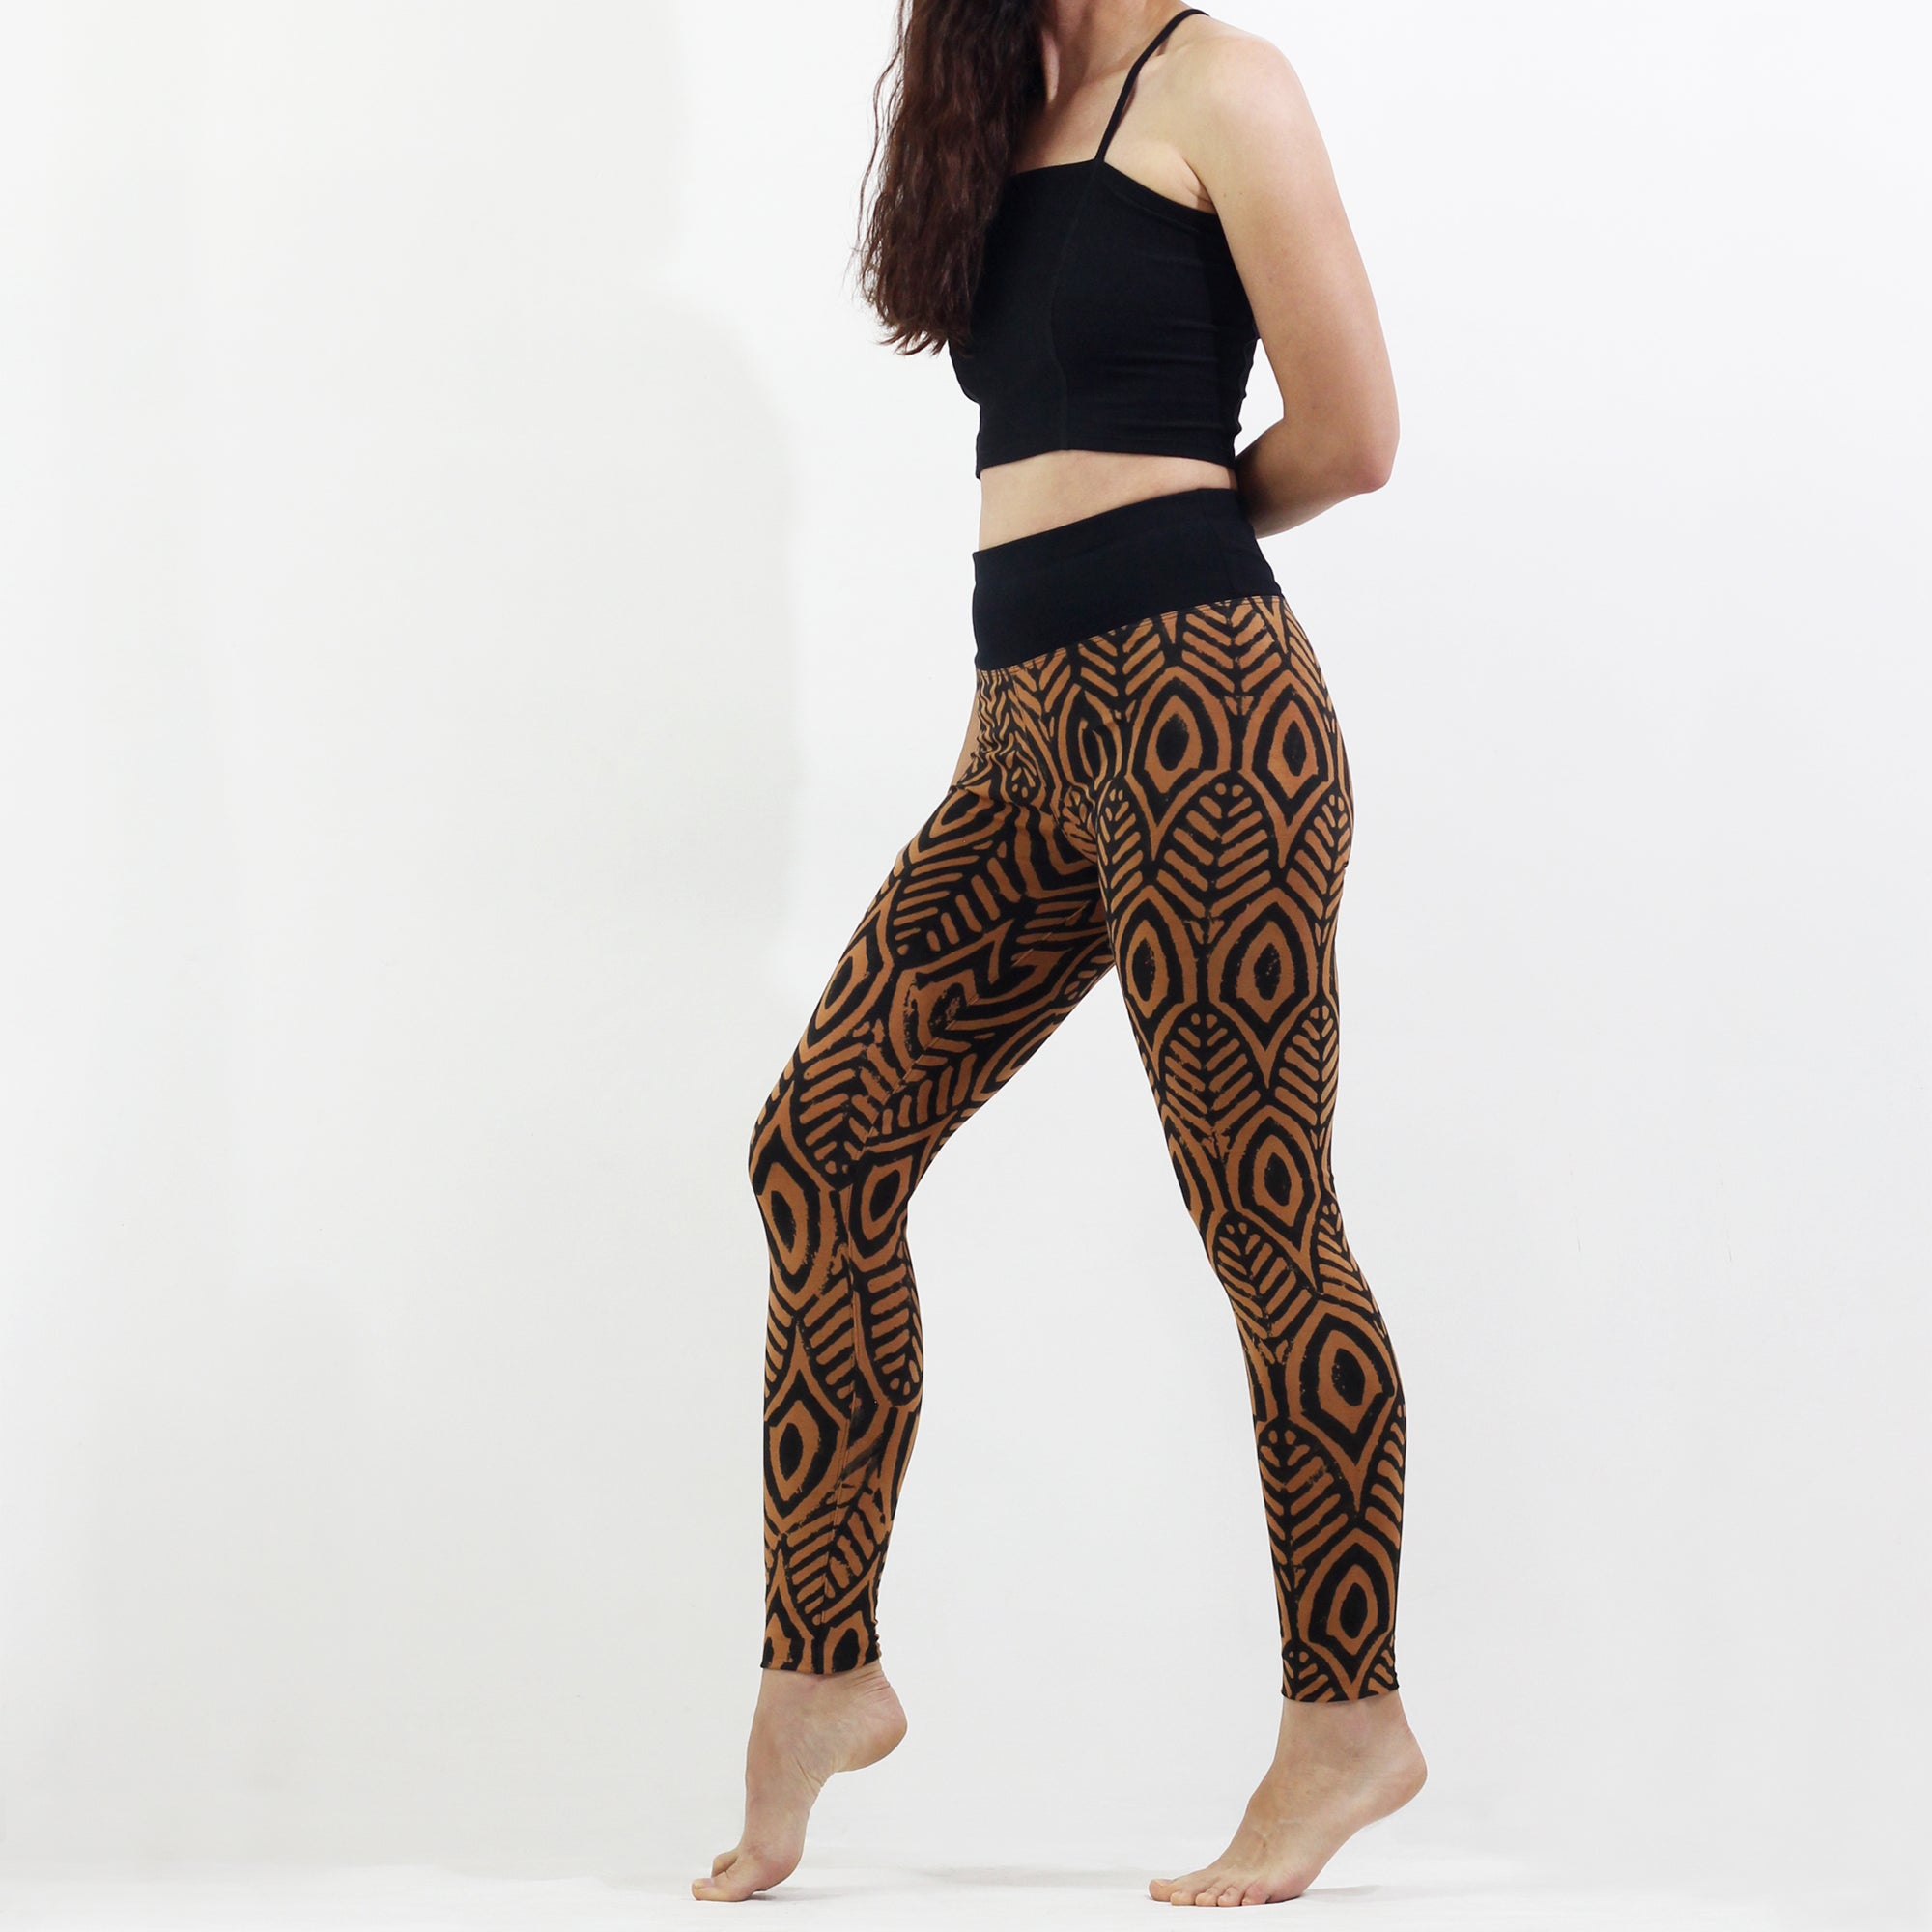 Hand Painted Leggings - Pharaoh’s Feathers